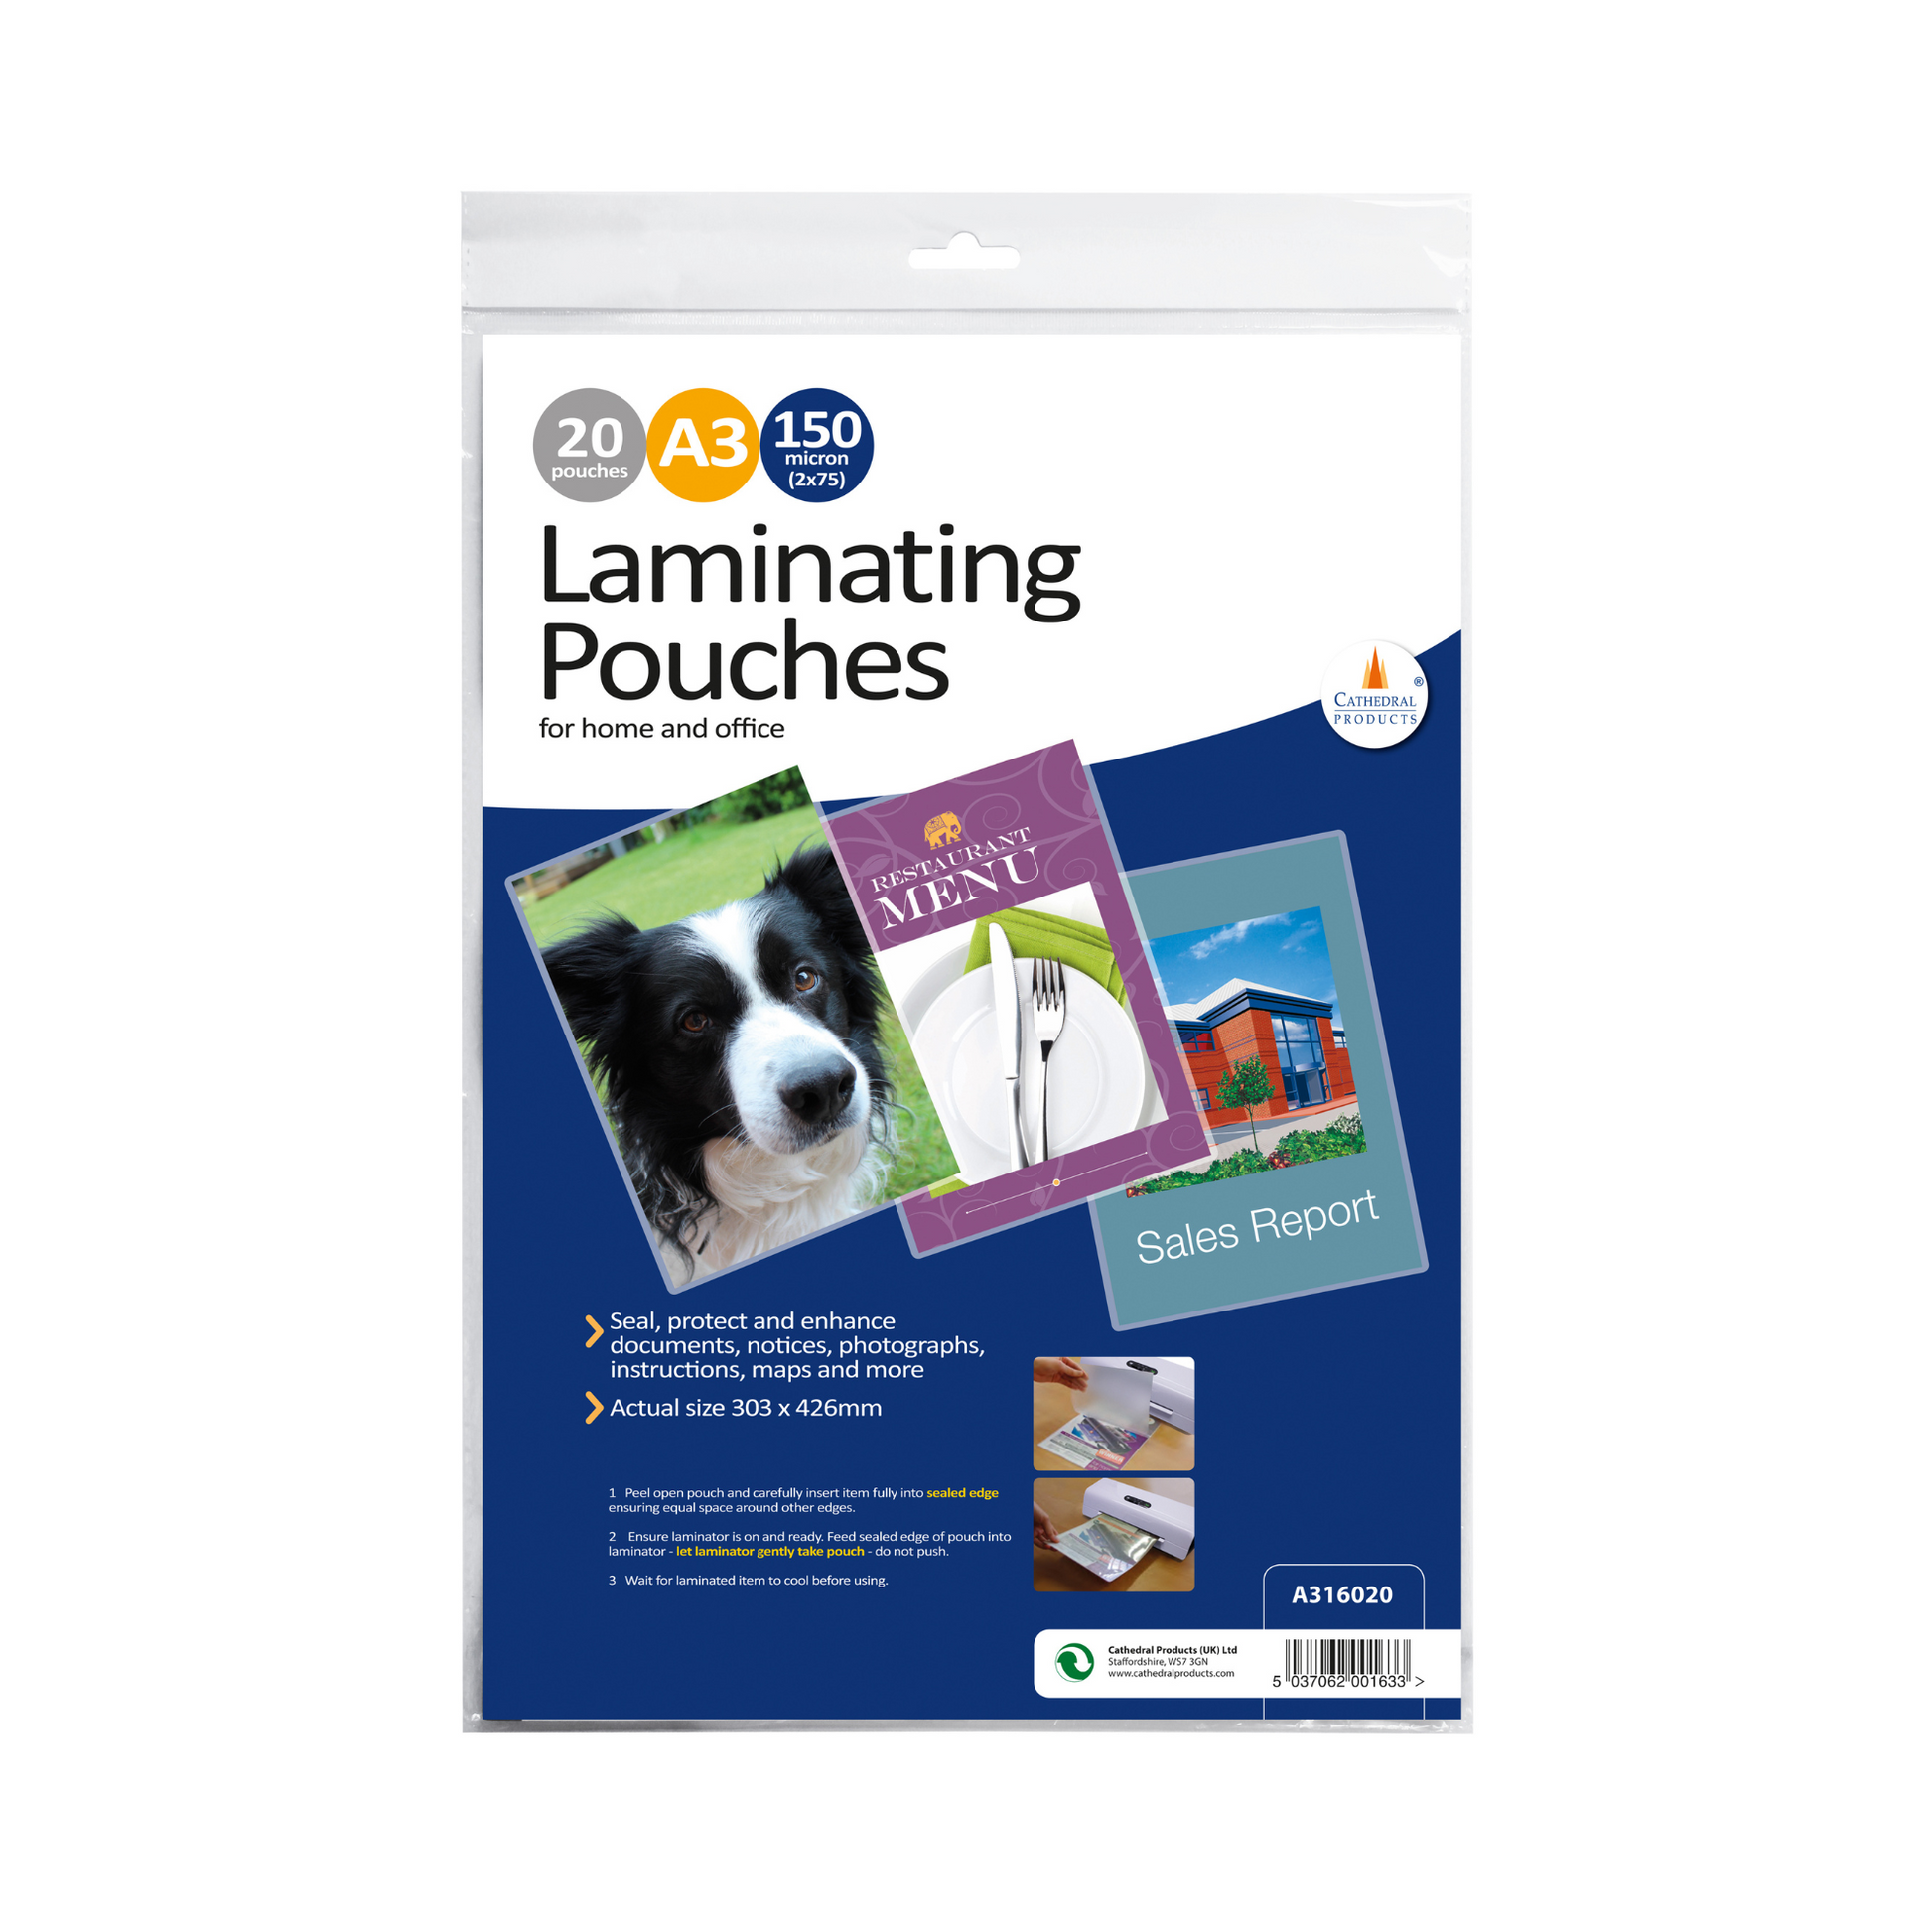 Package of Cathedral Products A3 gloss laminating pouches, 150 micron thickness, showing 20 pouches suitable for documents, notices, and photographs, with examples of a laminated dog photo, restaurant menu, and sales report on the front.